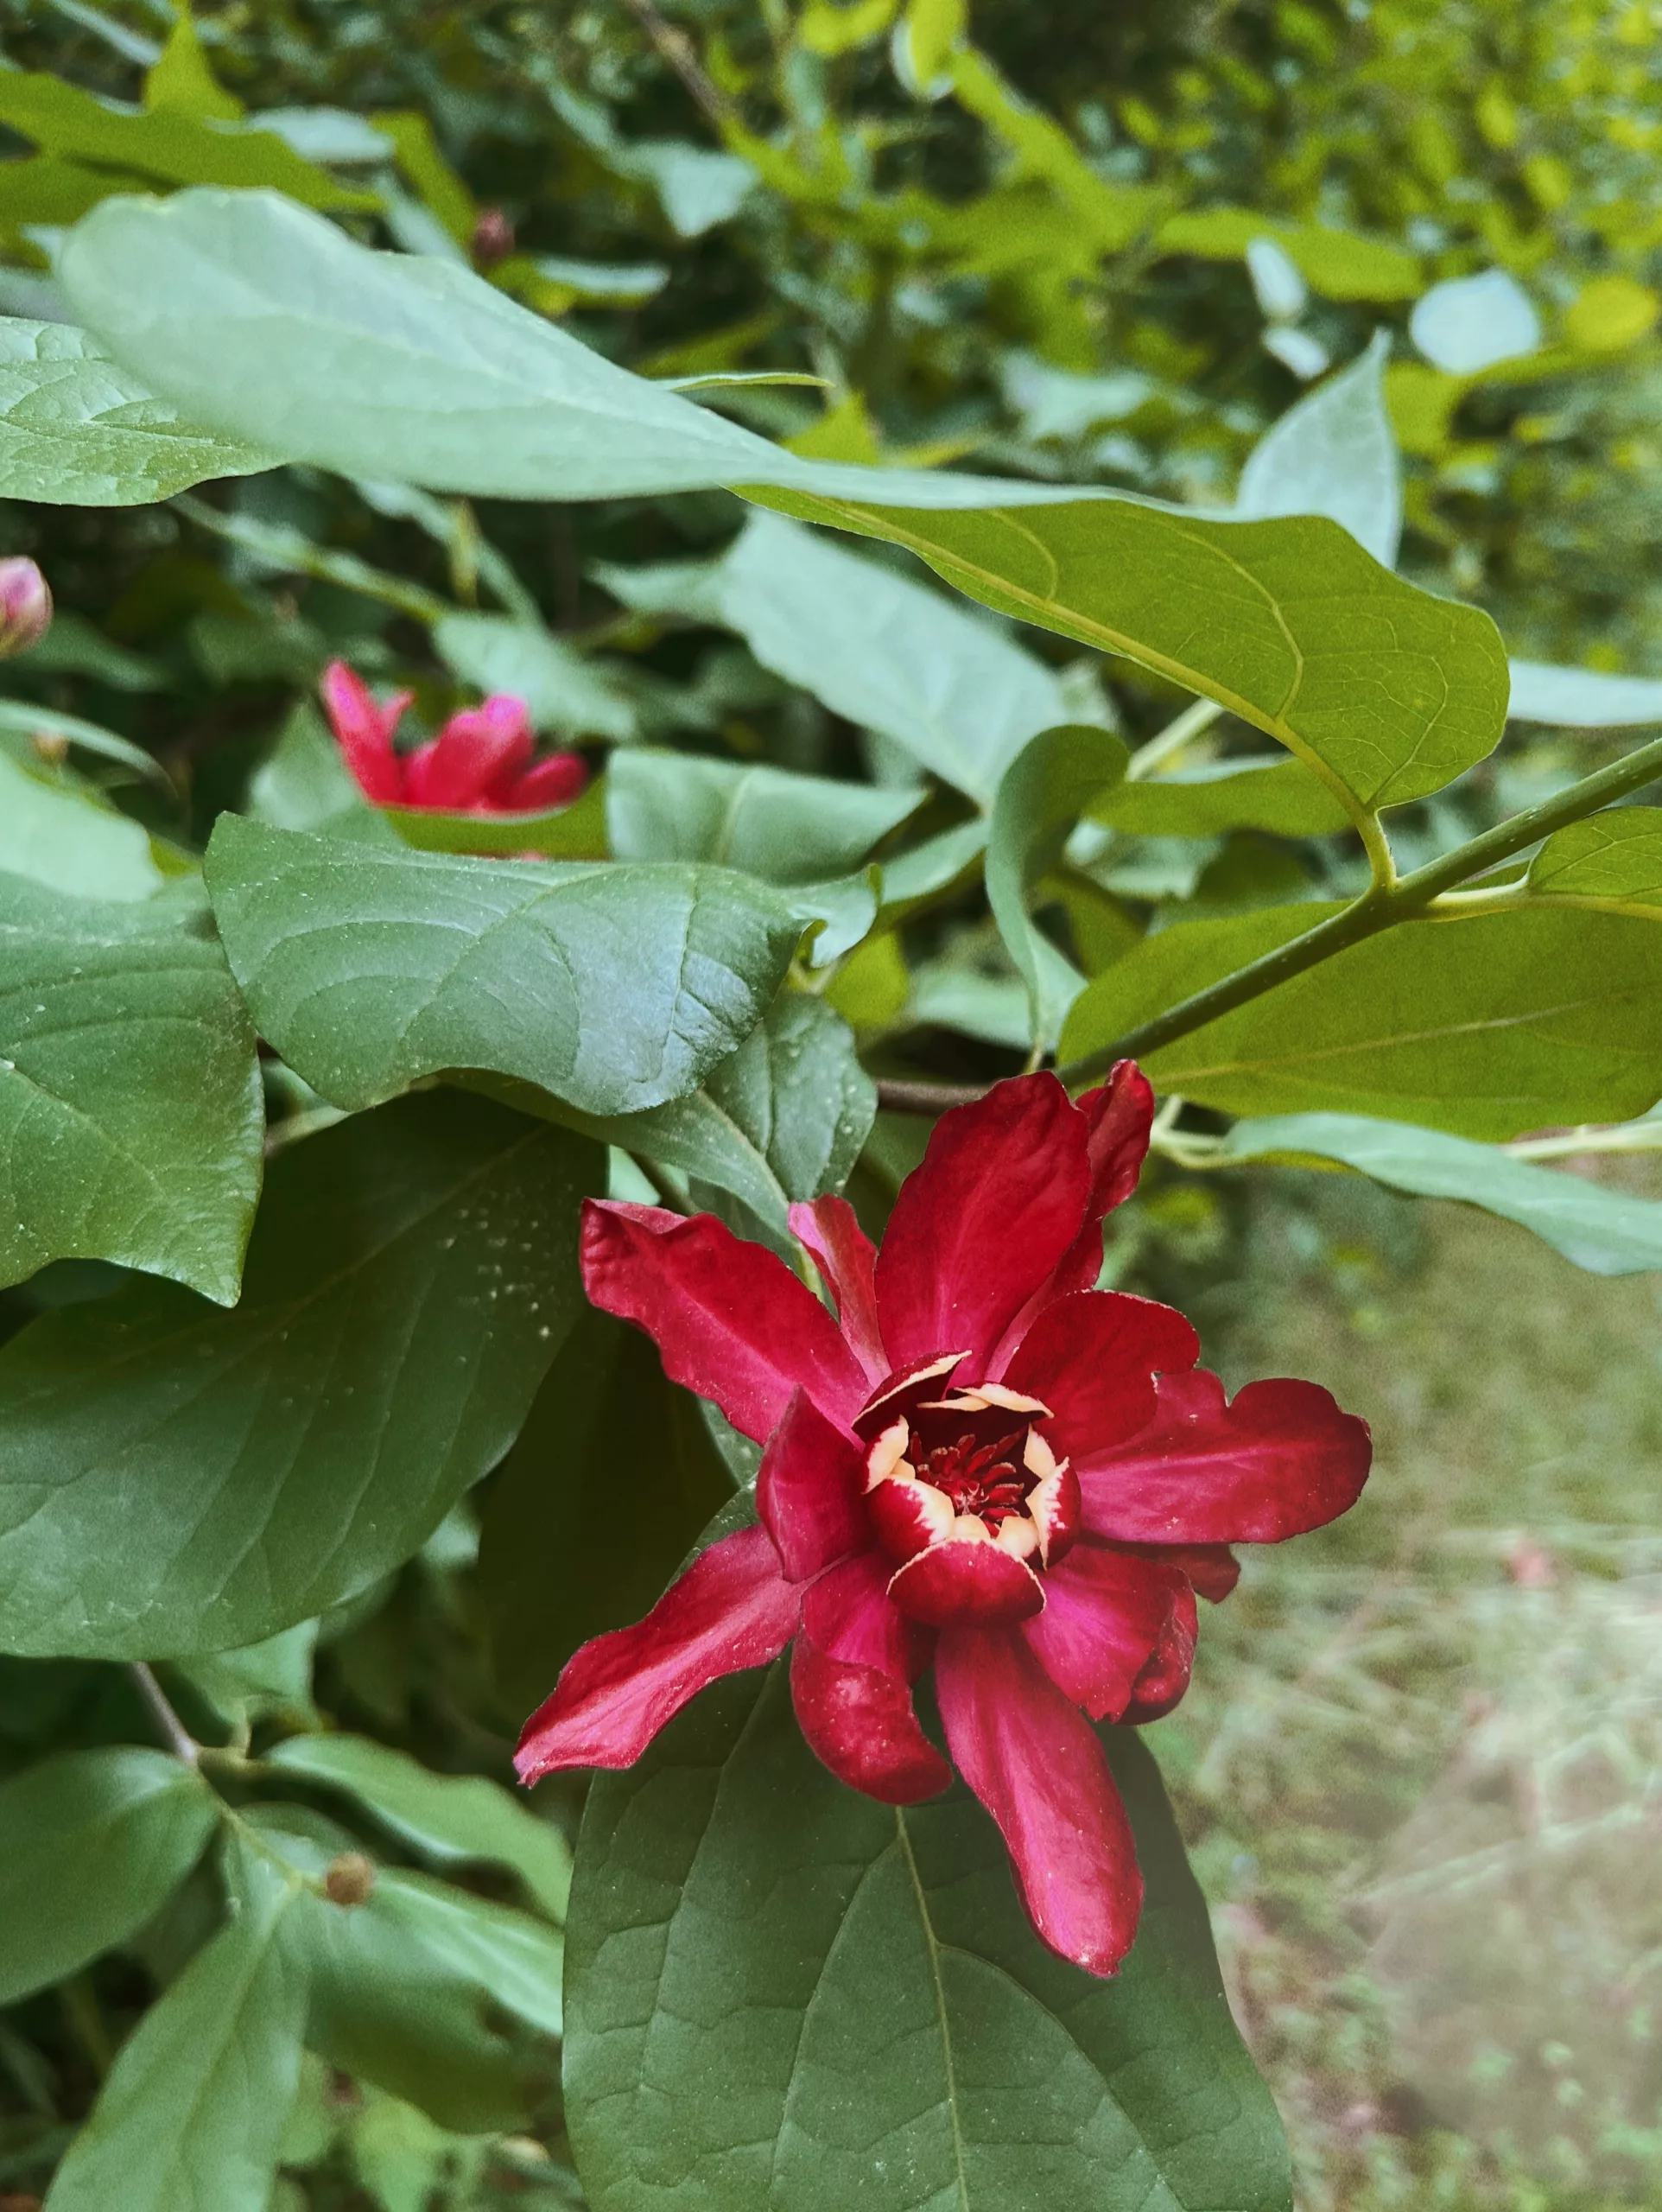 A red flower on a plant with green leaves.